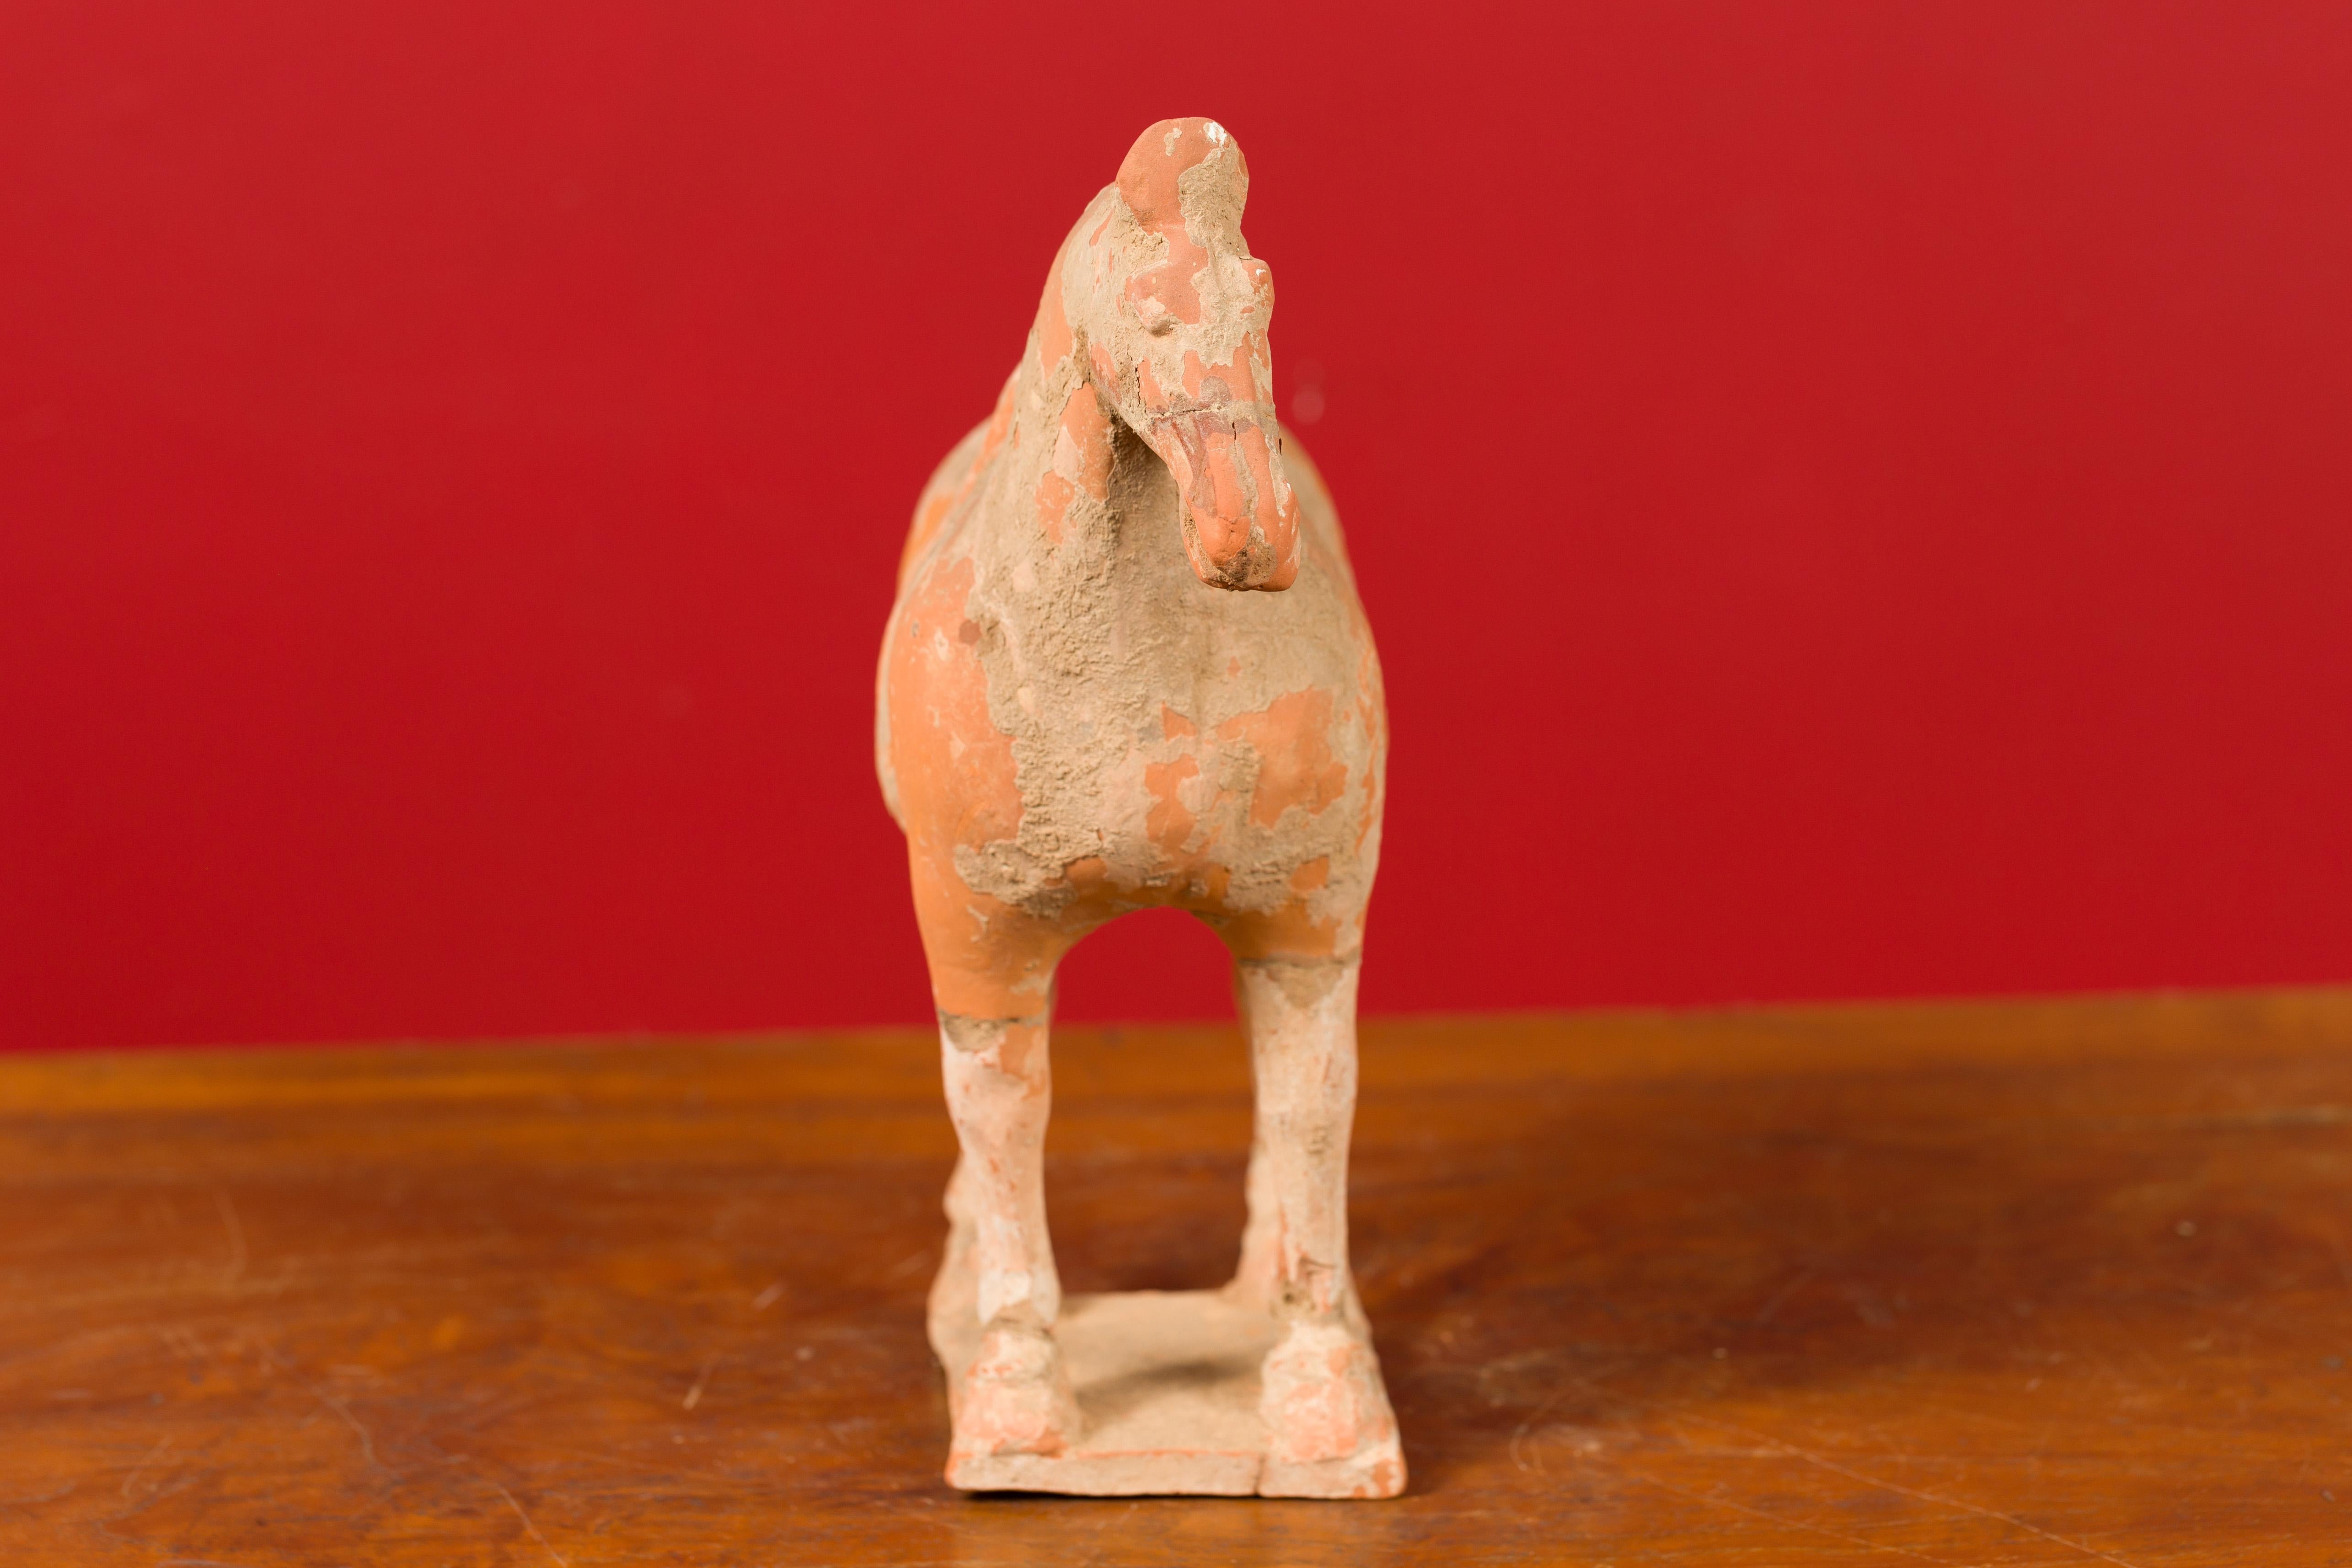 Chinese Han Dynasty Period Mingqi Terracotta Horse with Original Pigmentation 2